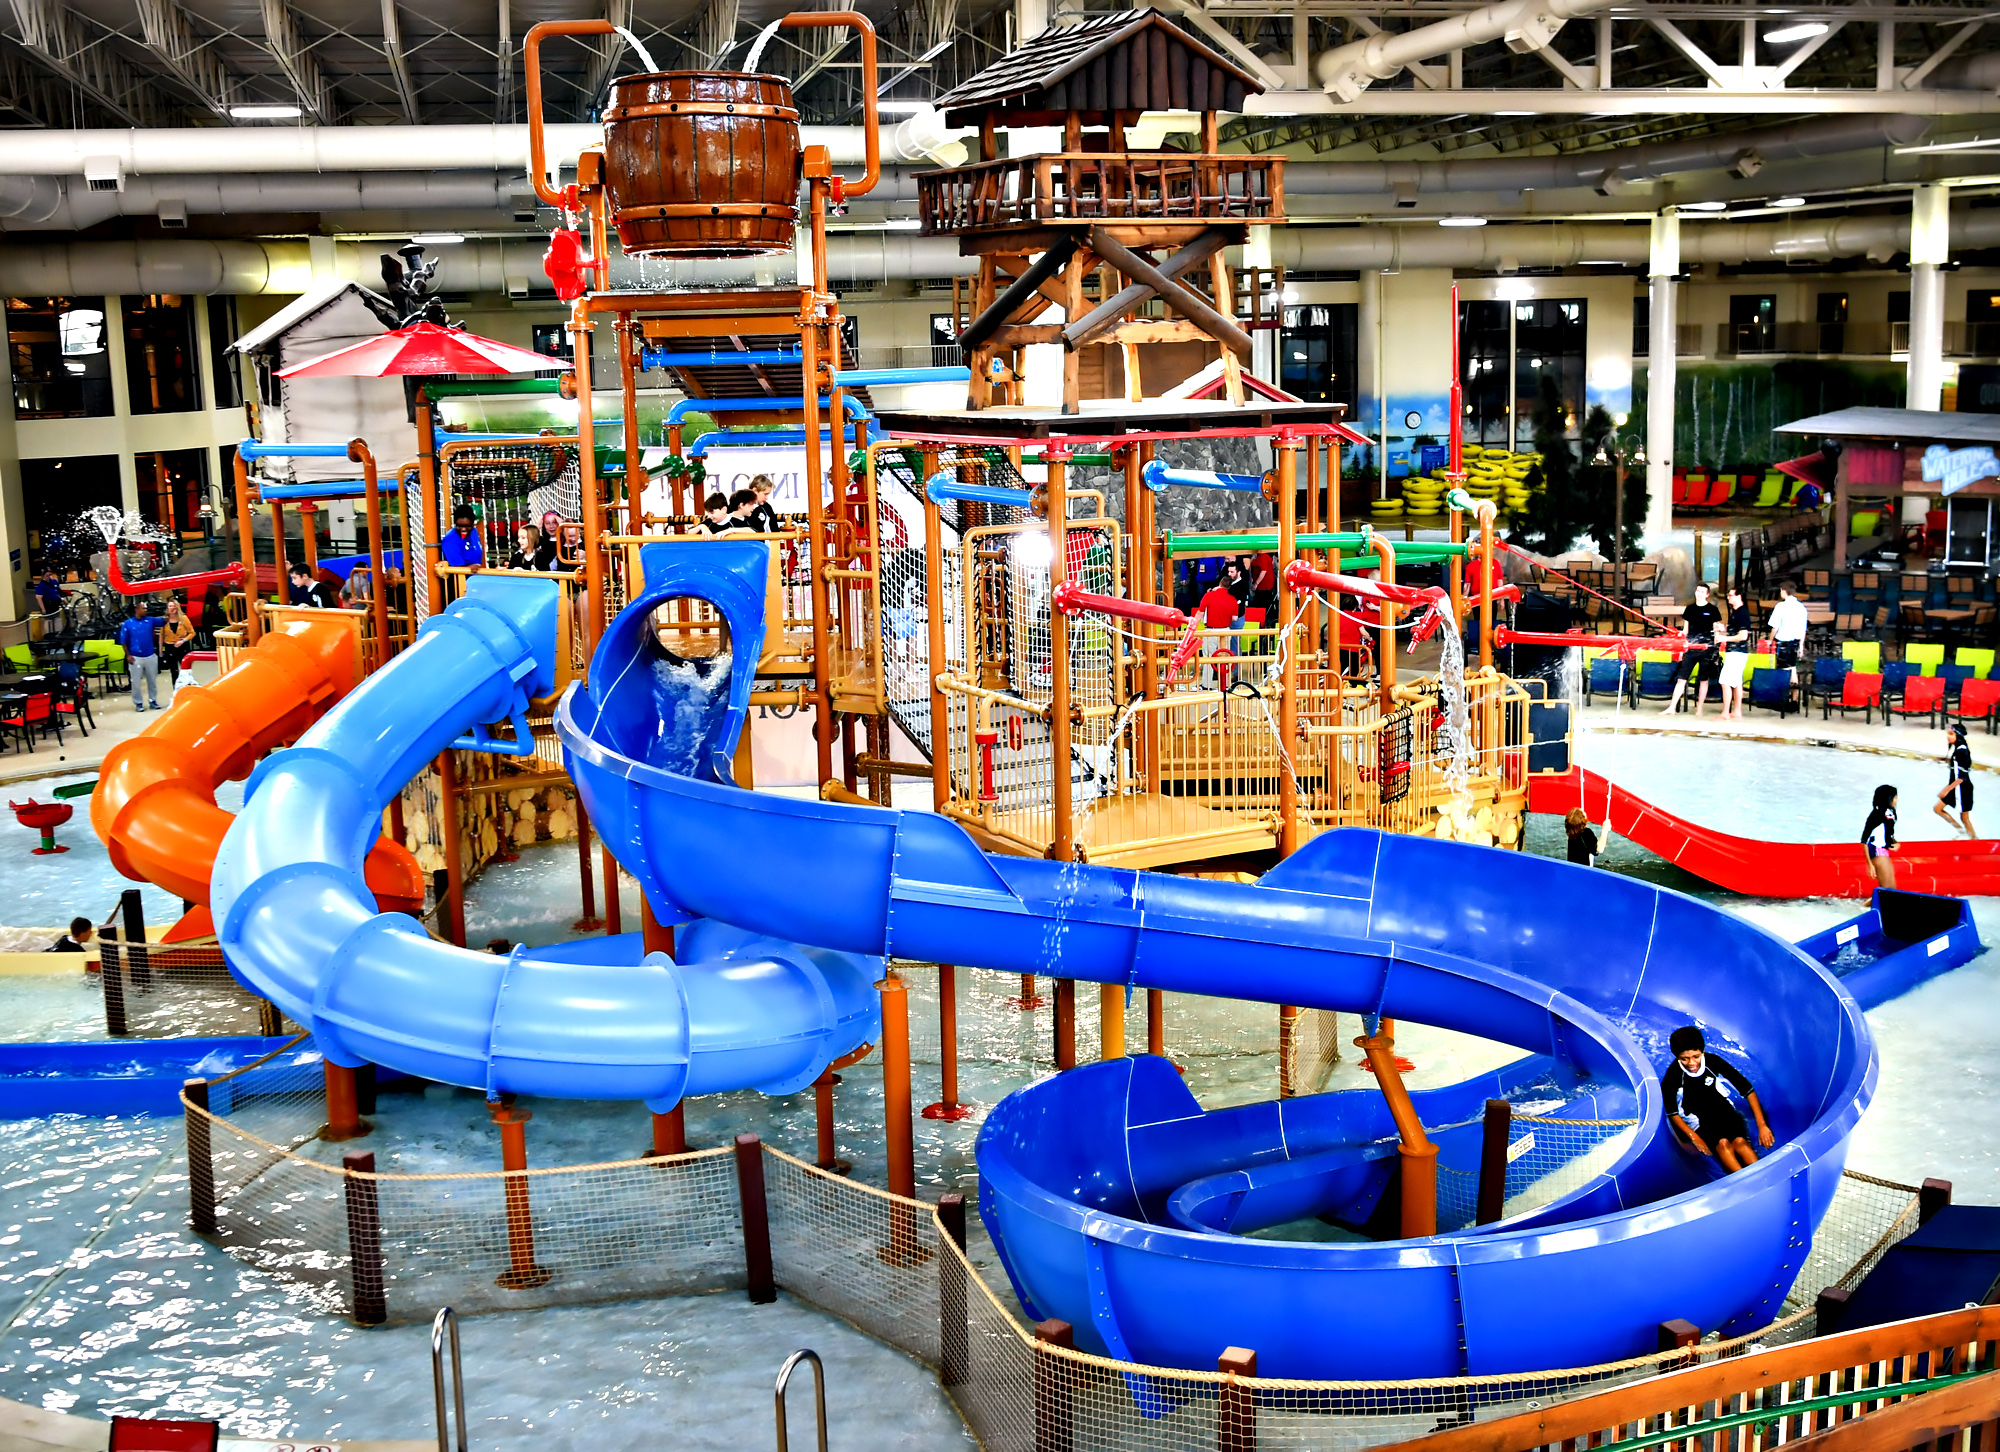 7 Water Parks You Must Visit in Minnesota